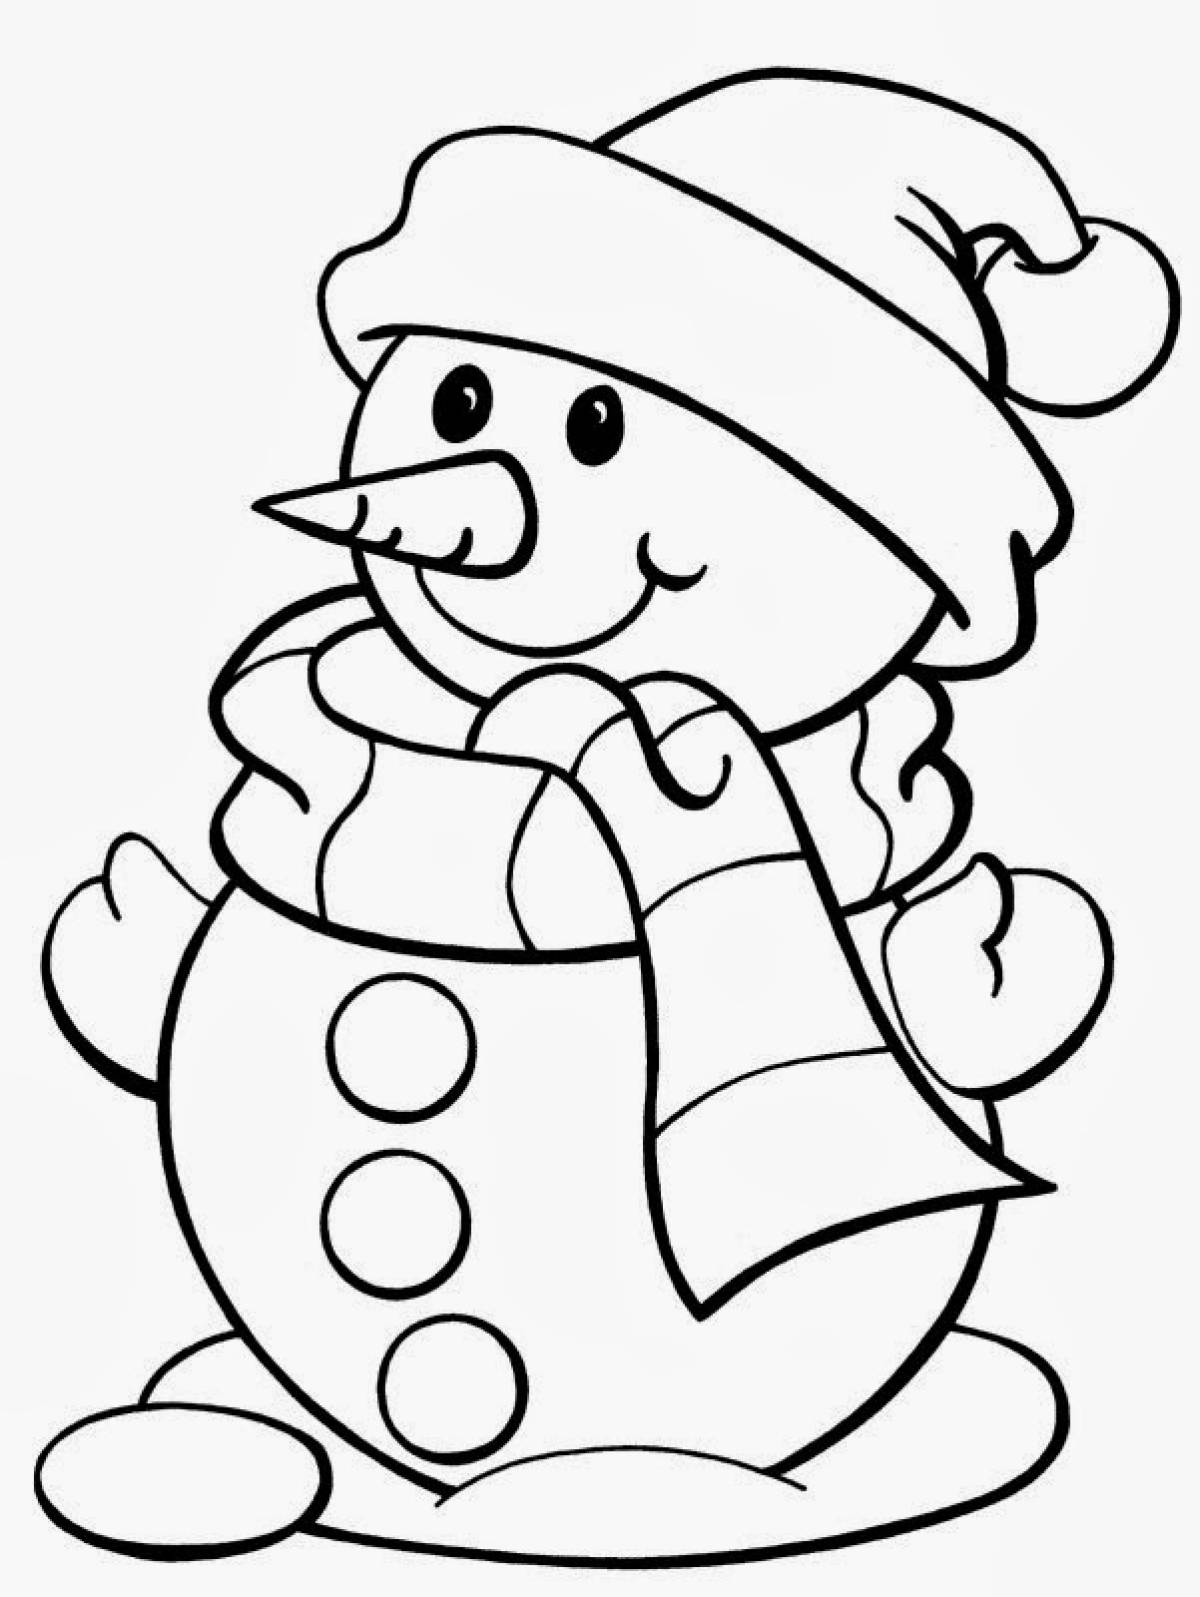 Snowman coloring book for kids